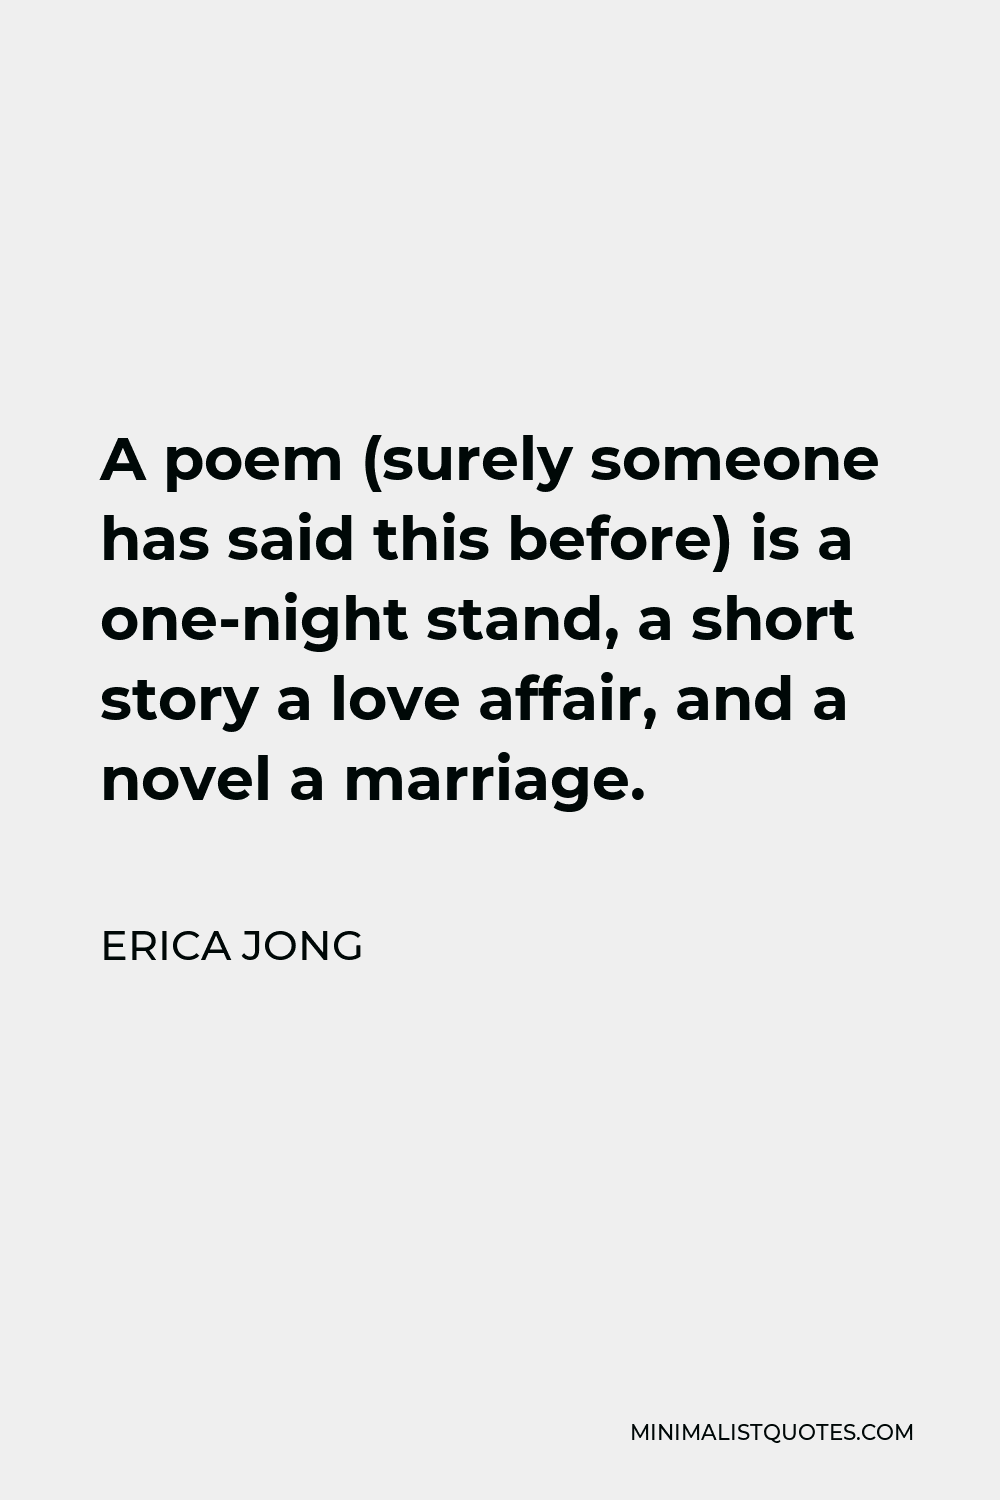 Erica Jong Quote - A poem (surely someone has said this before) is a one-night stand, a short story a love affair, and a novel a marriage.